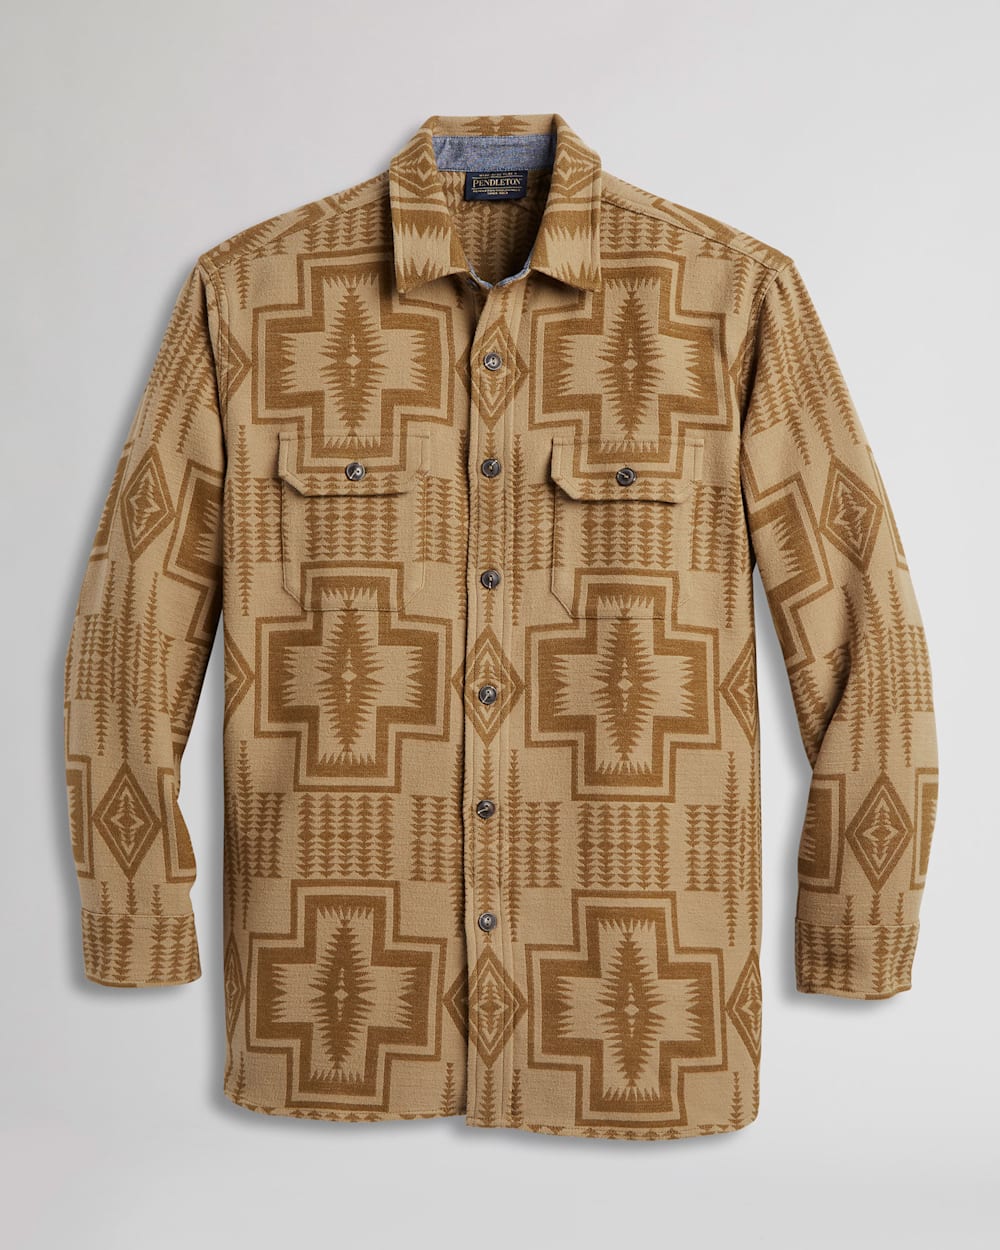 ALTERNATE VIEW OF MEN'S DOUBLESOFT DRIFTWOOD SHIRT IN TAN/BROWN HARDING image number 8